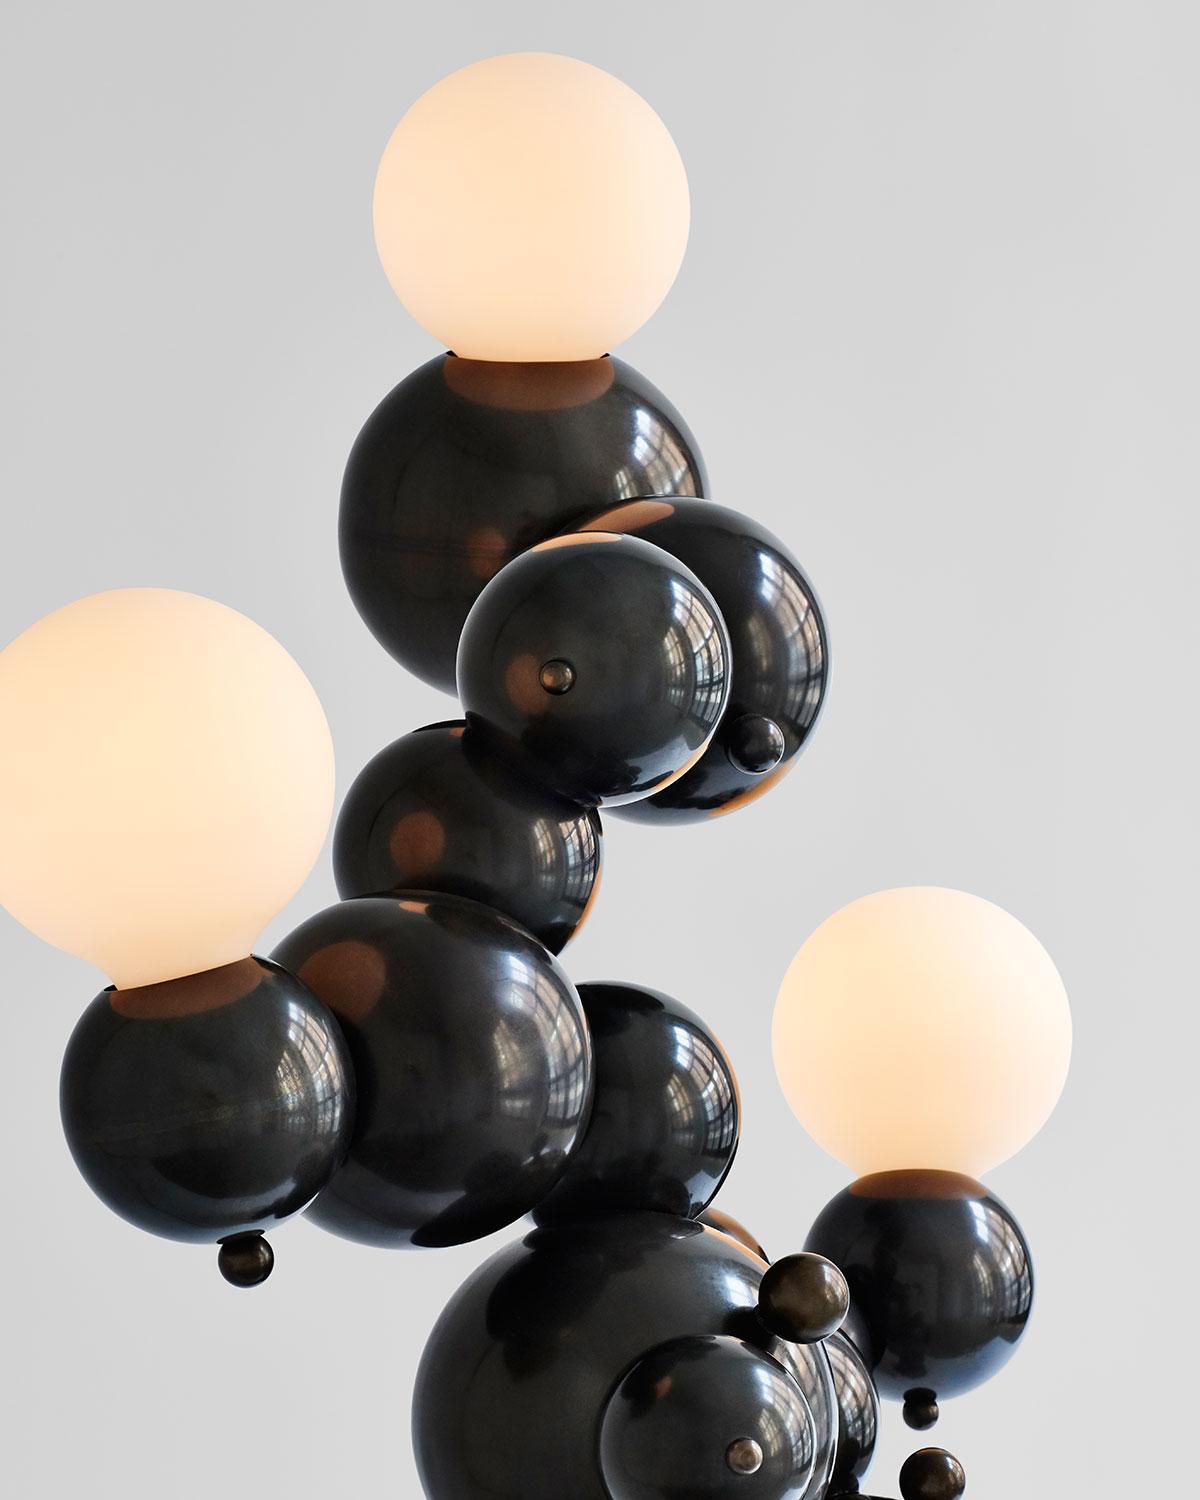 First-edition organic mid-size floor lamp with three lights made of interlocking spun brass spheres, from Rosie Li's 